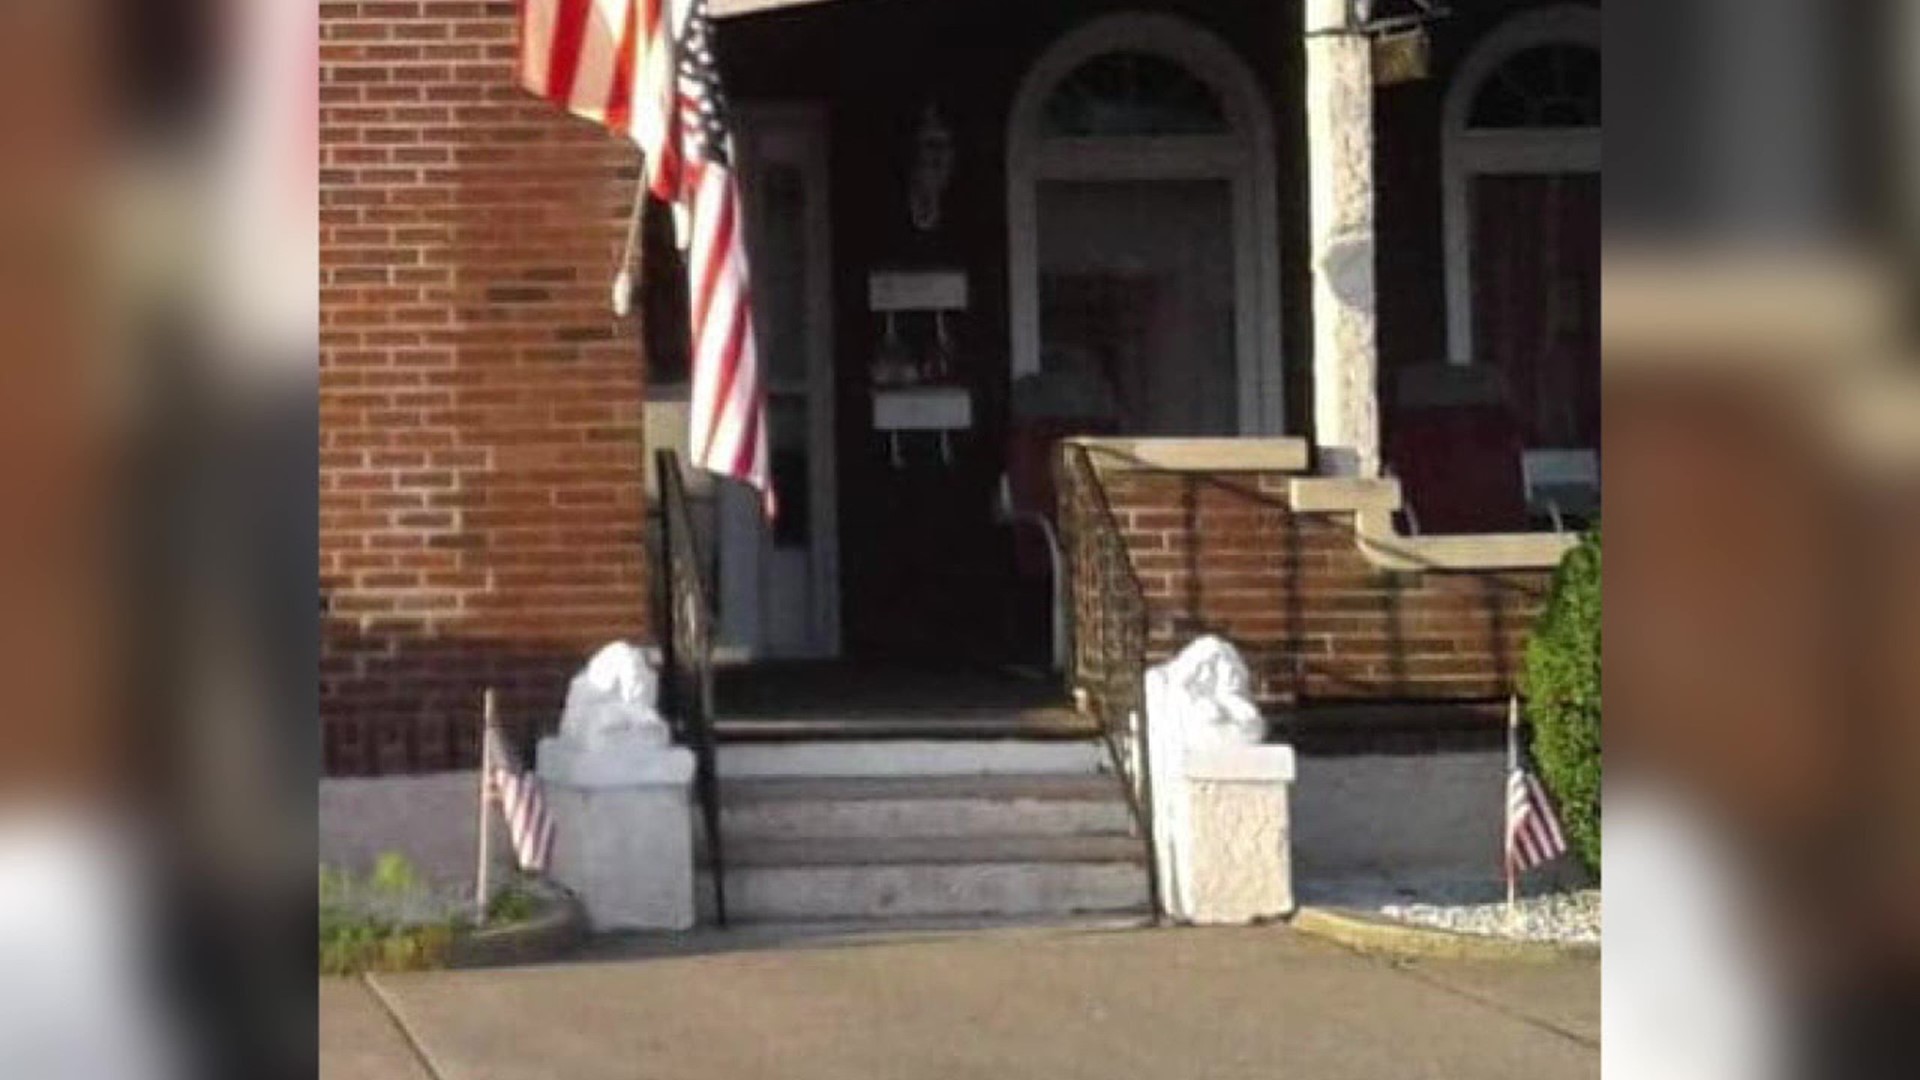 That's the question many in Hanover Township are asking after porch decorations were stolen from a front porch.